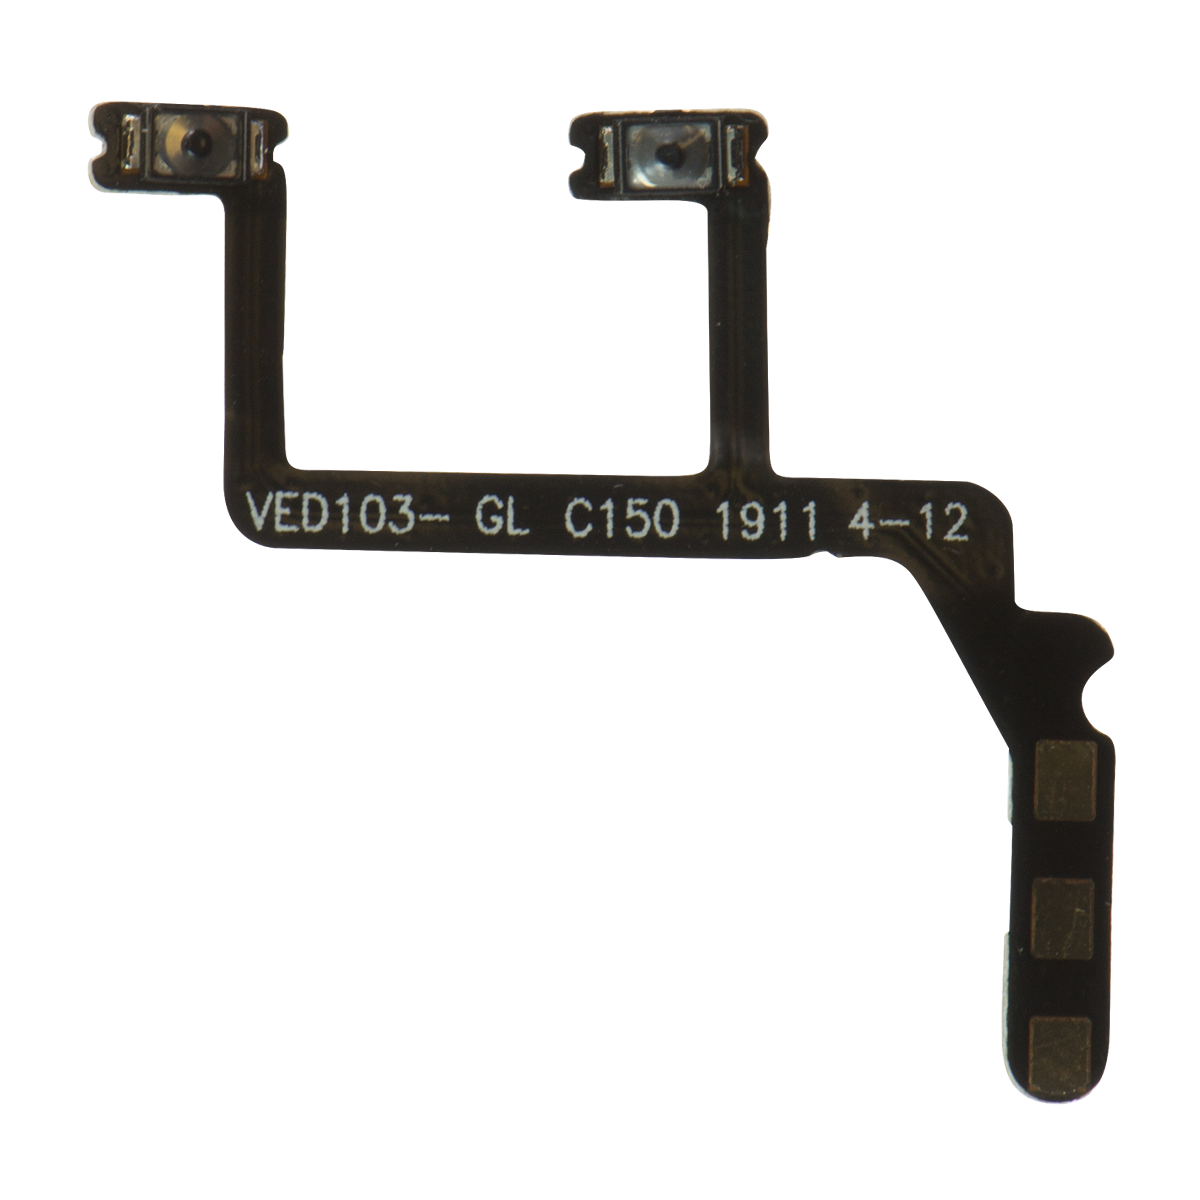 OnePlus 7 Pro Volume Button Flex Cable Replacement